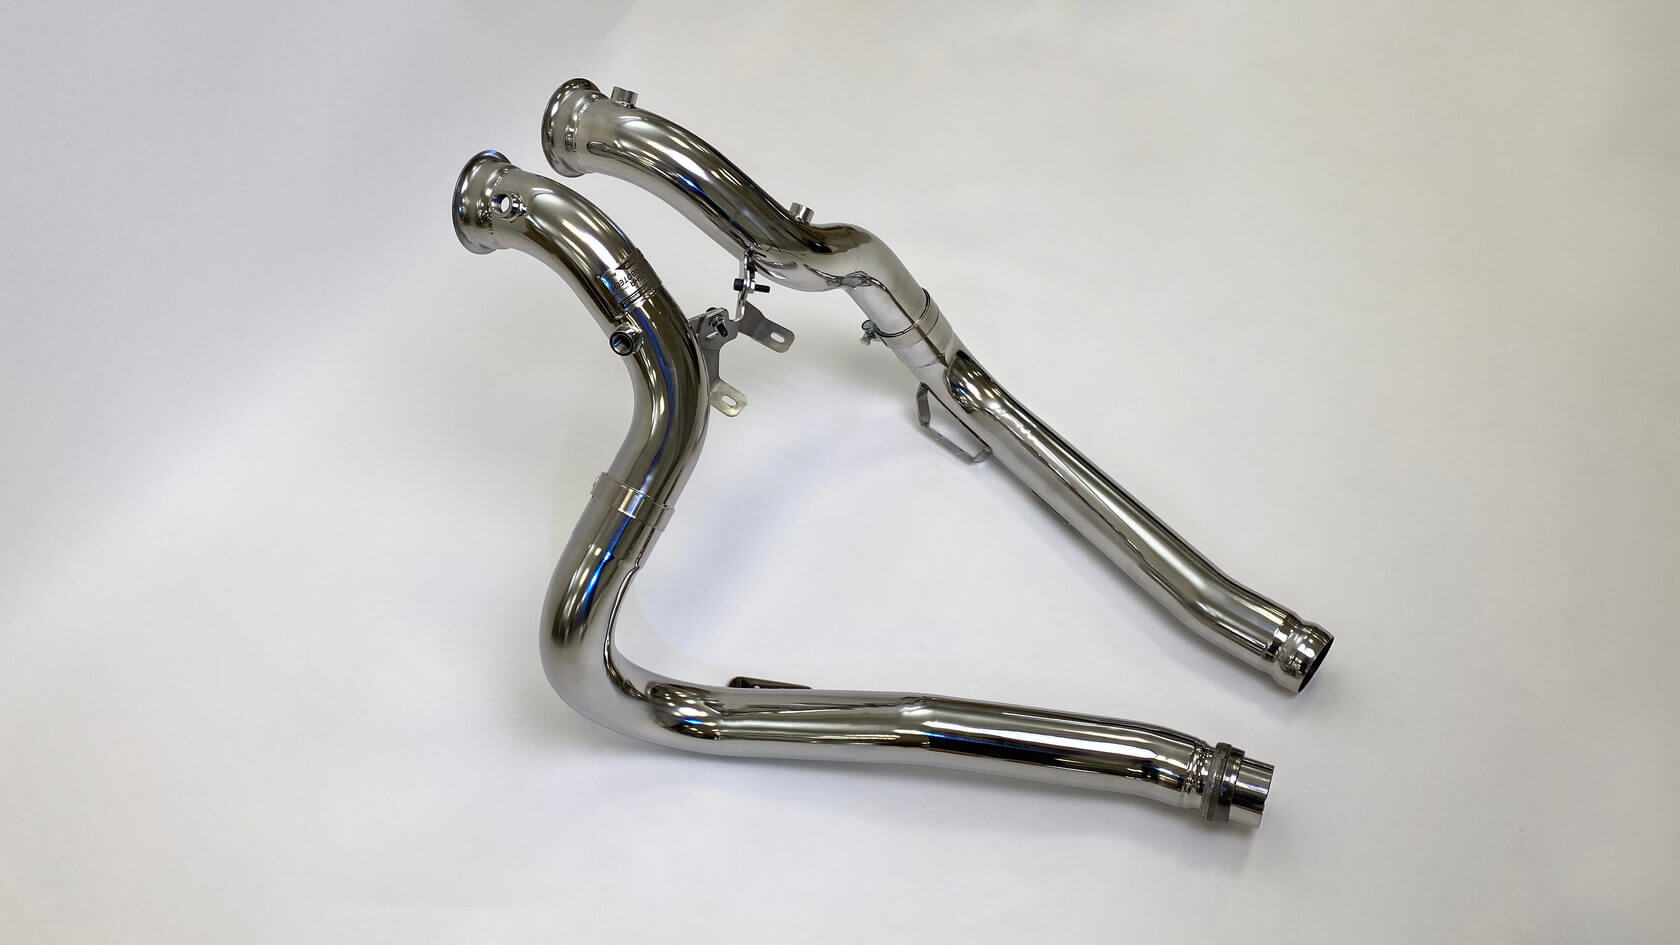 DEIKIN 10-MB.GT63s.C190.C190-DP Downpipe for Mercedes-AMG GT 63s (C190) without HeatShield Photo-0 